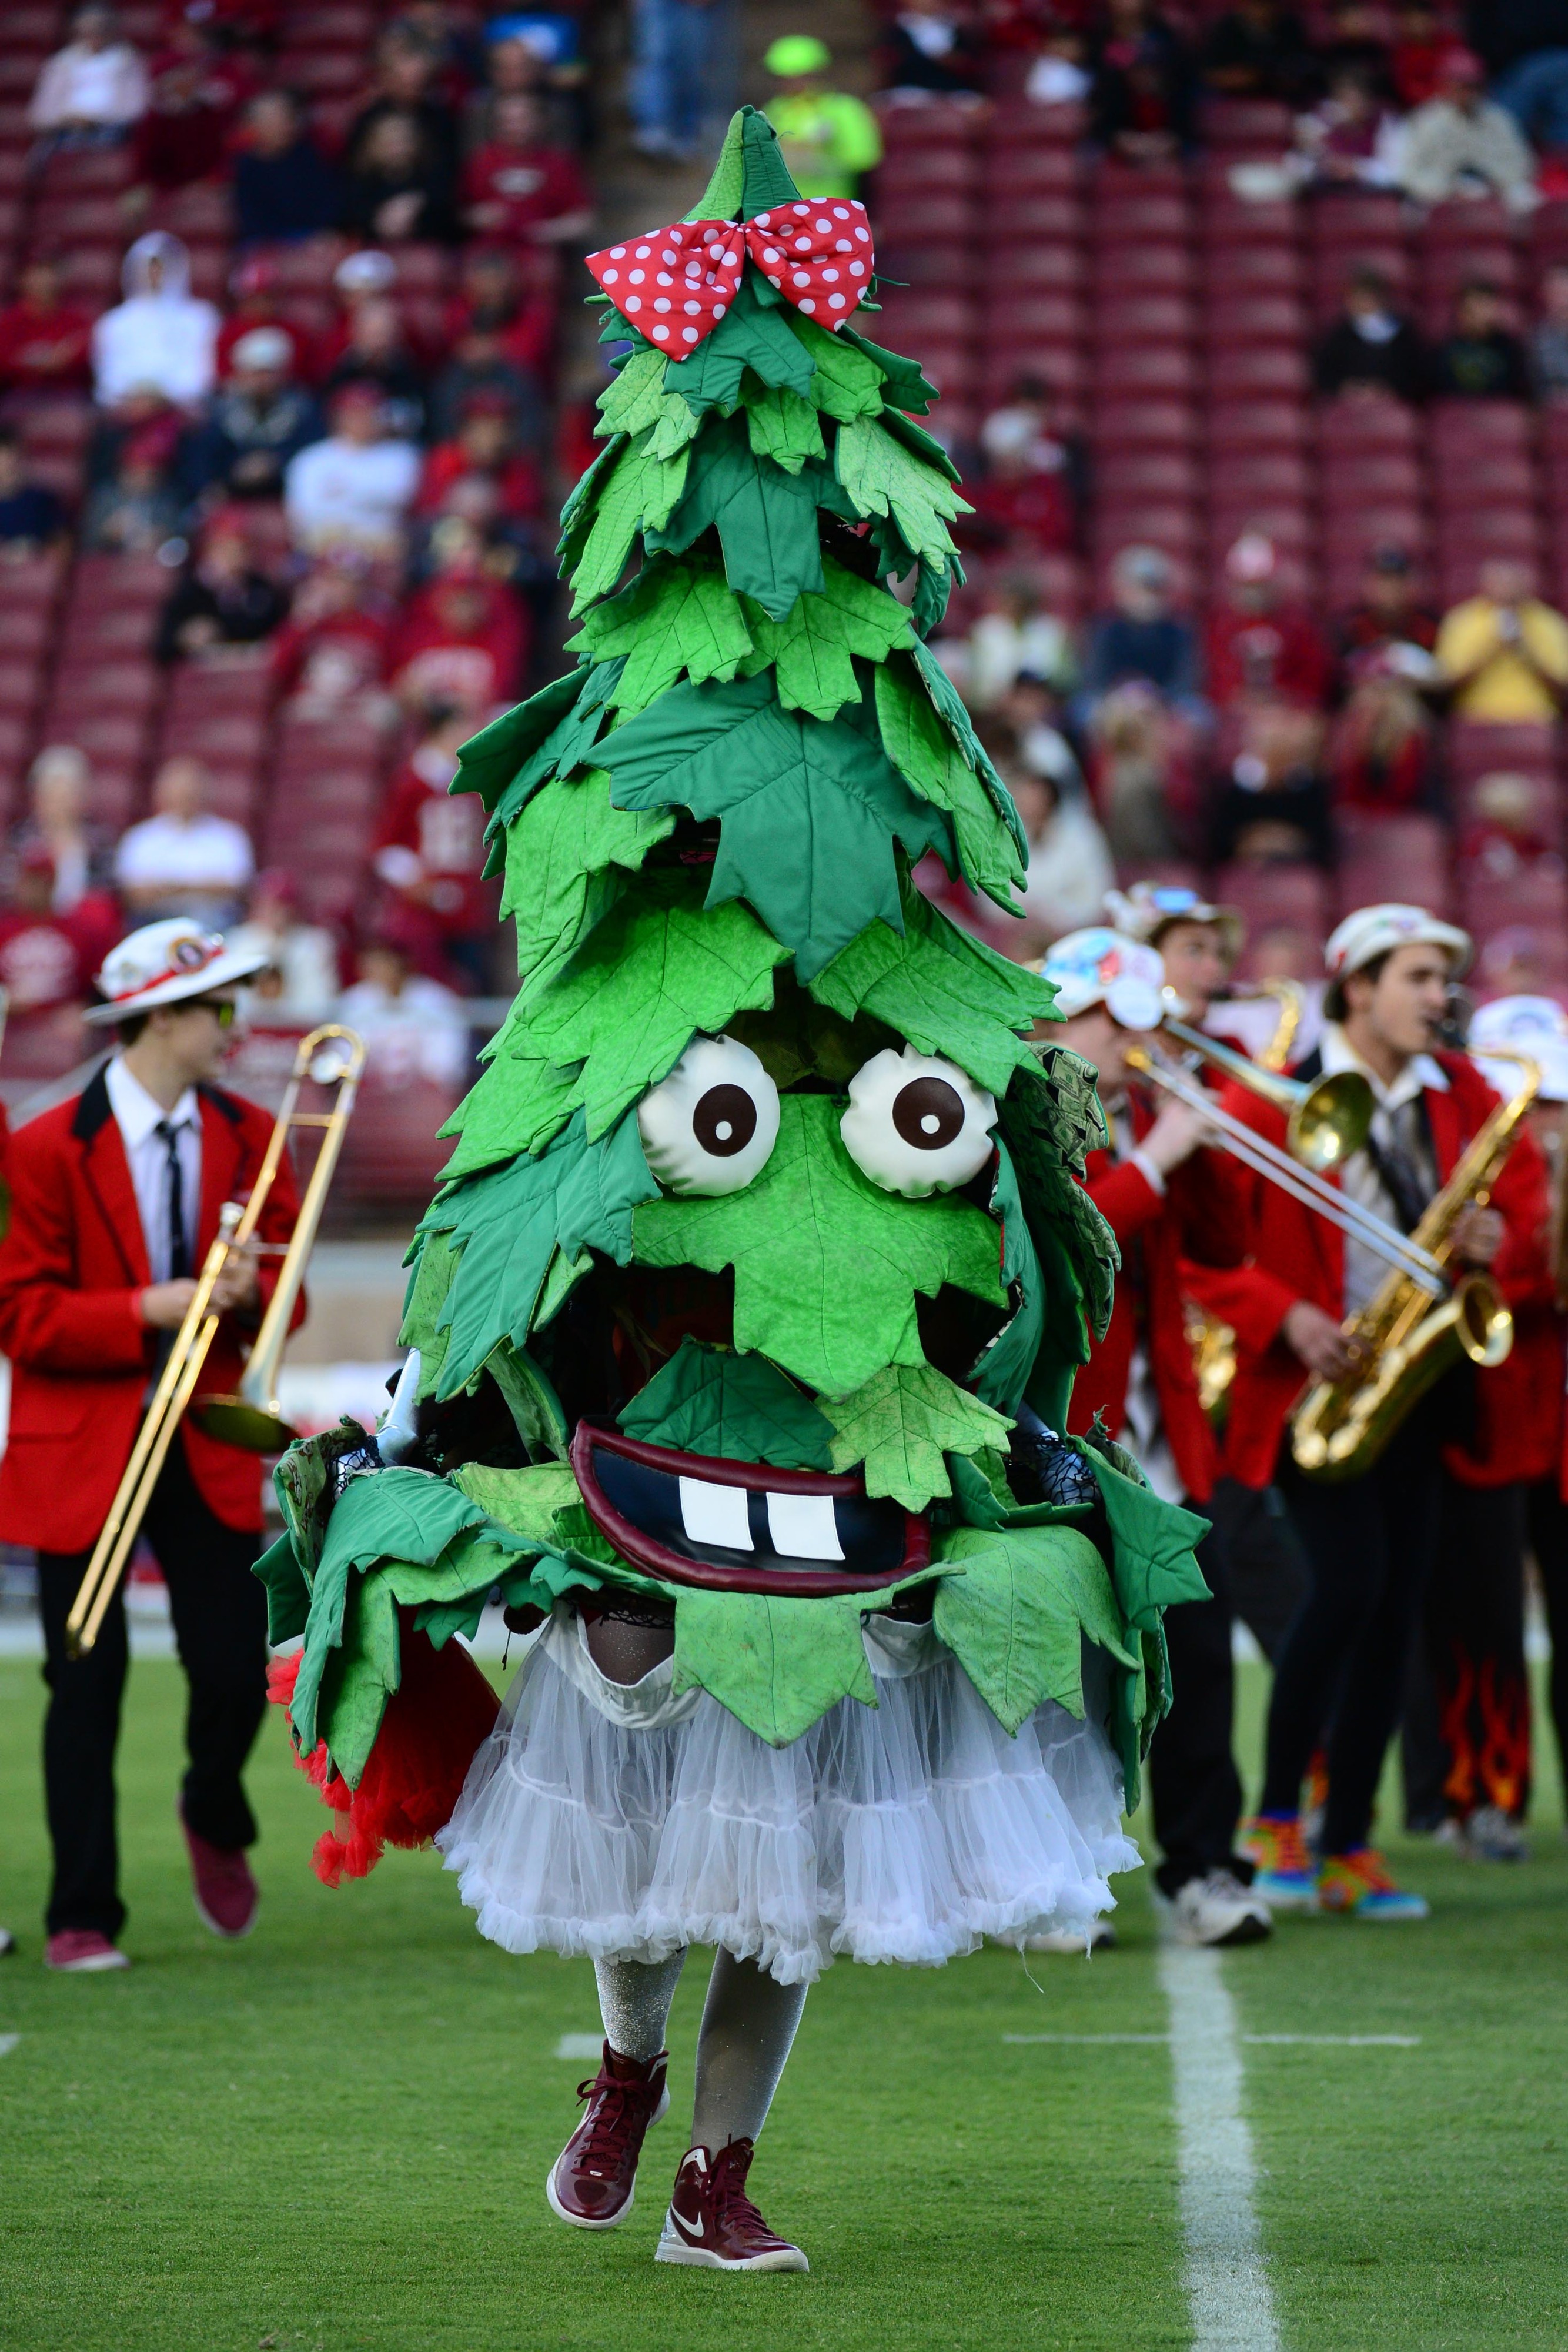 It's football season, which means the return of the Stanford band and that crazy tree.